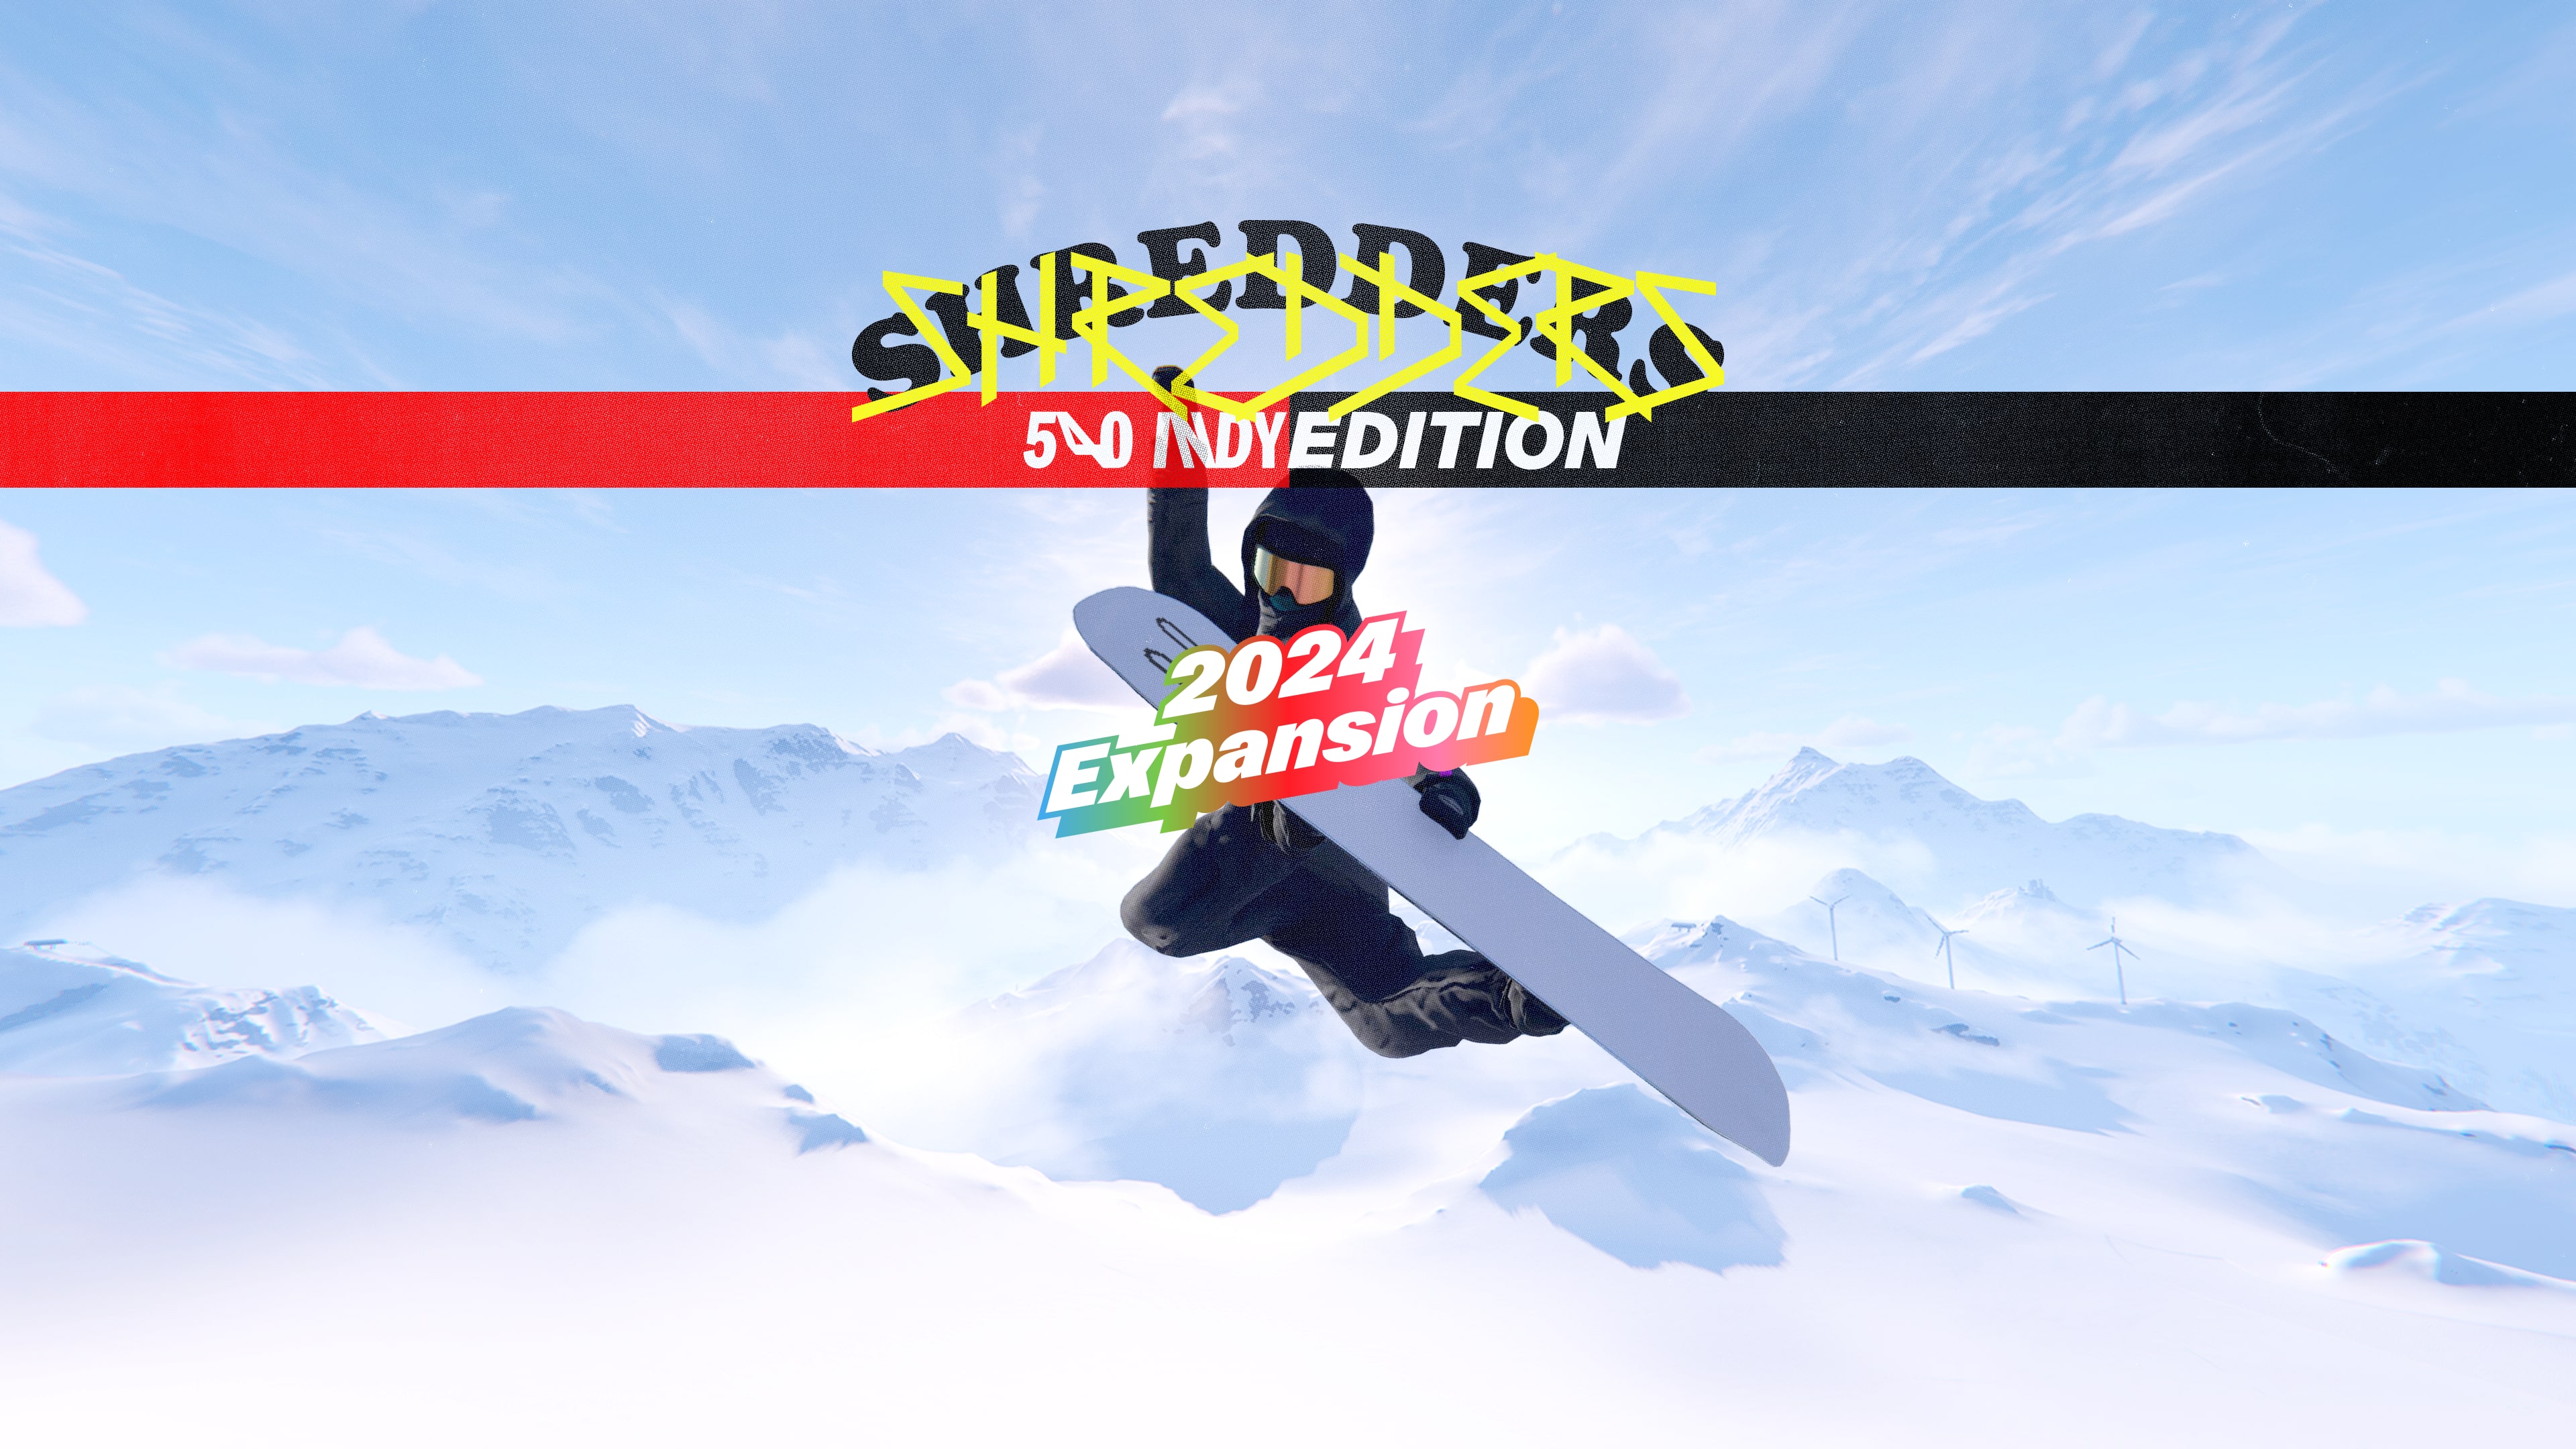 Shredders - 540INDY Edition (Simplified Chinese, English, Korean, Japanese)